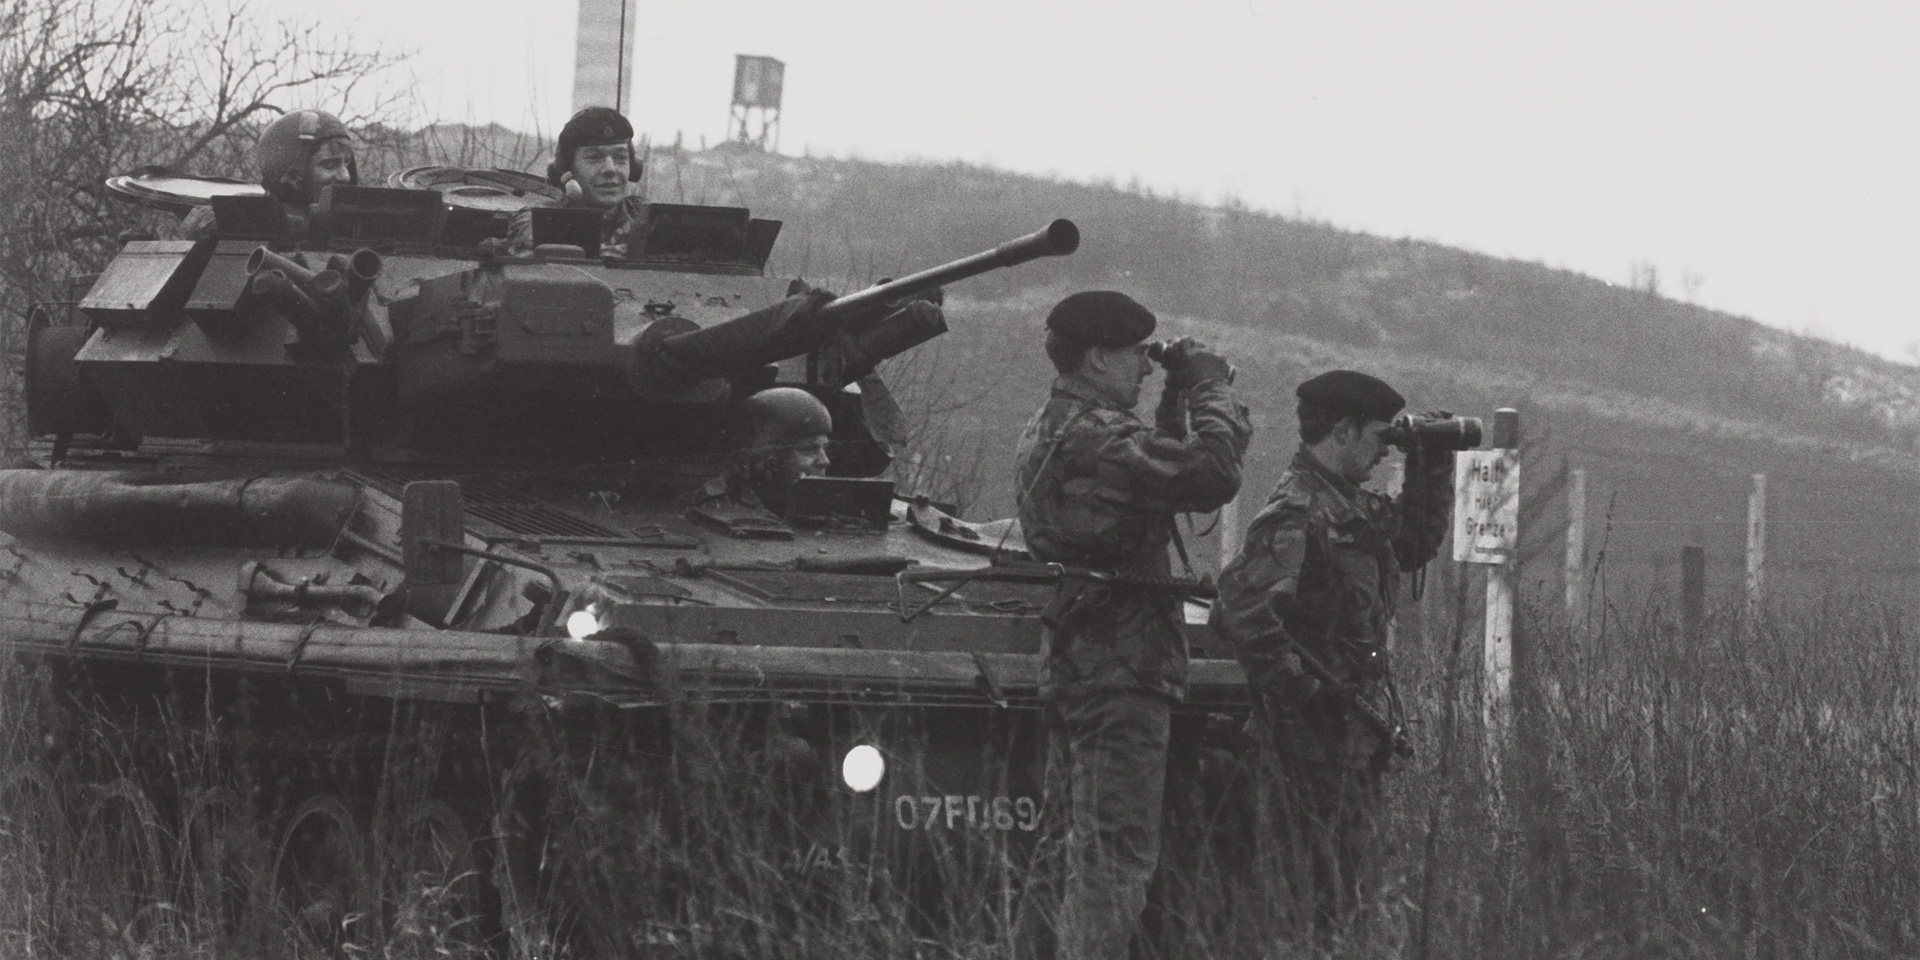 A training patrol of the 16th/5th The Queen’s Royal Lancers visits the Inner German Border, 1979